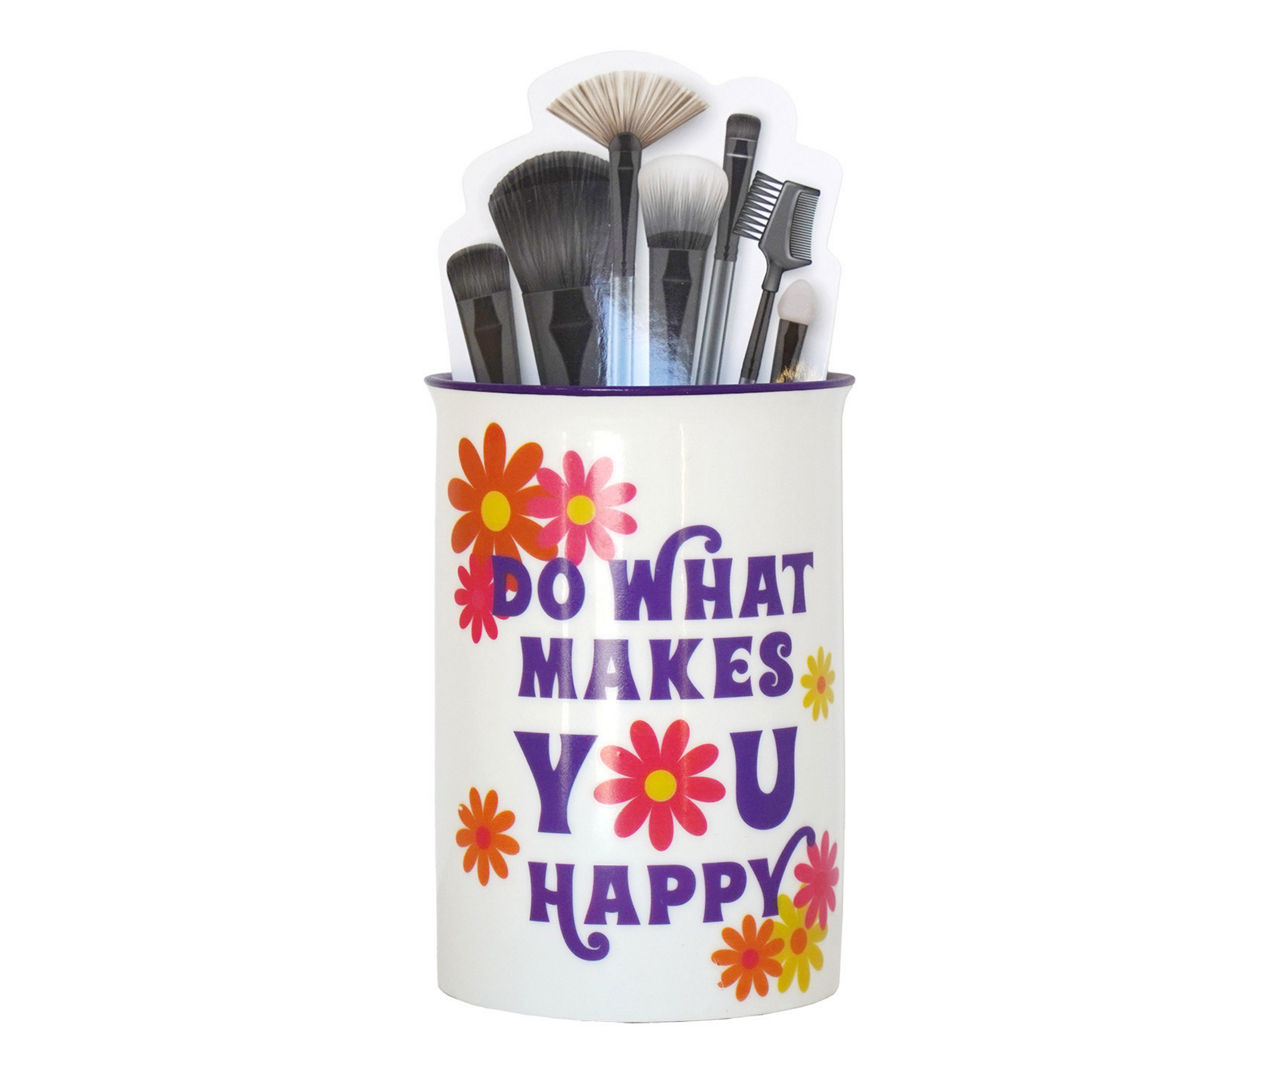 "Do What Makes You Happy" Ceramic Makeup Brush Holder